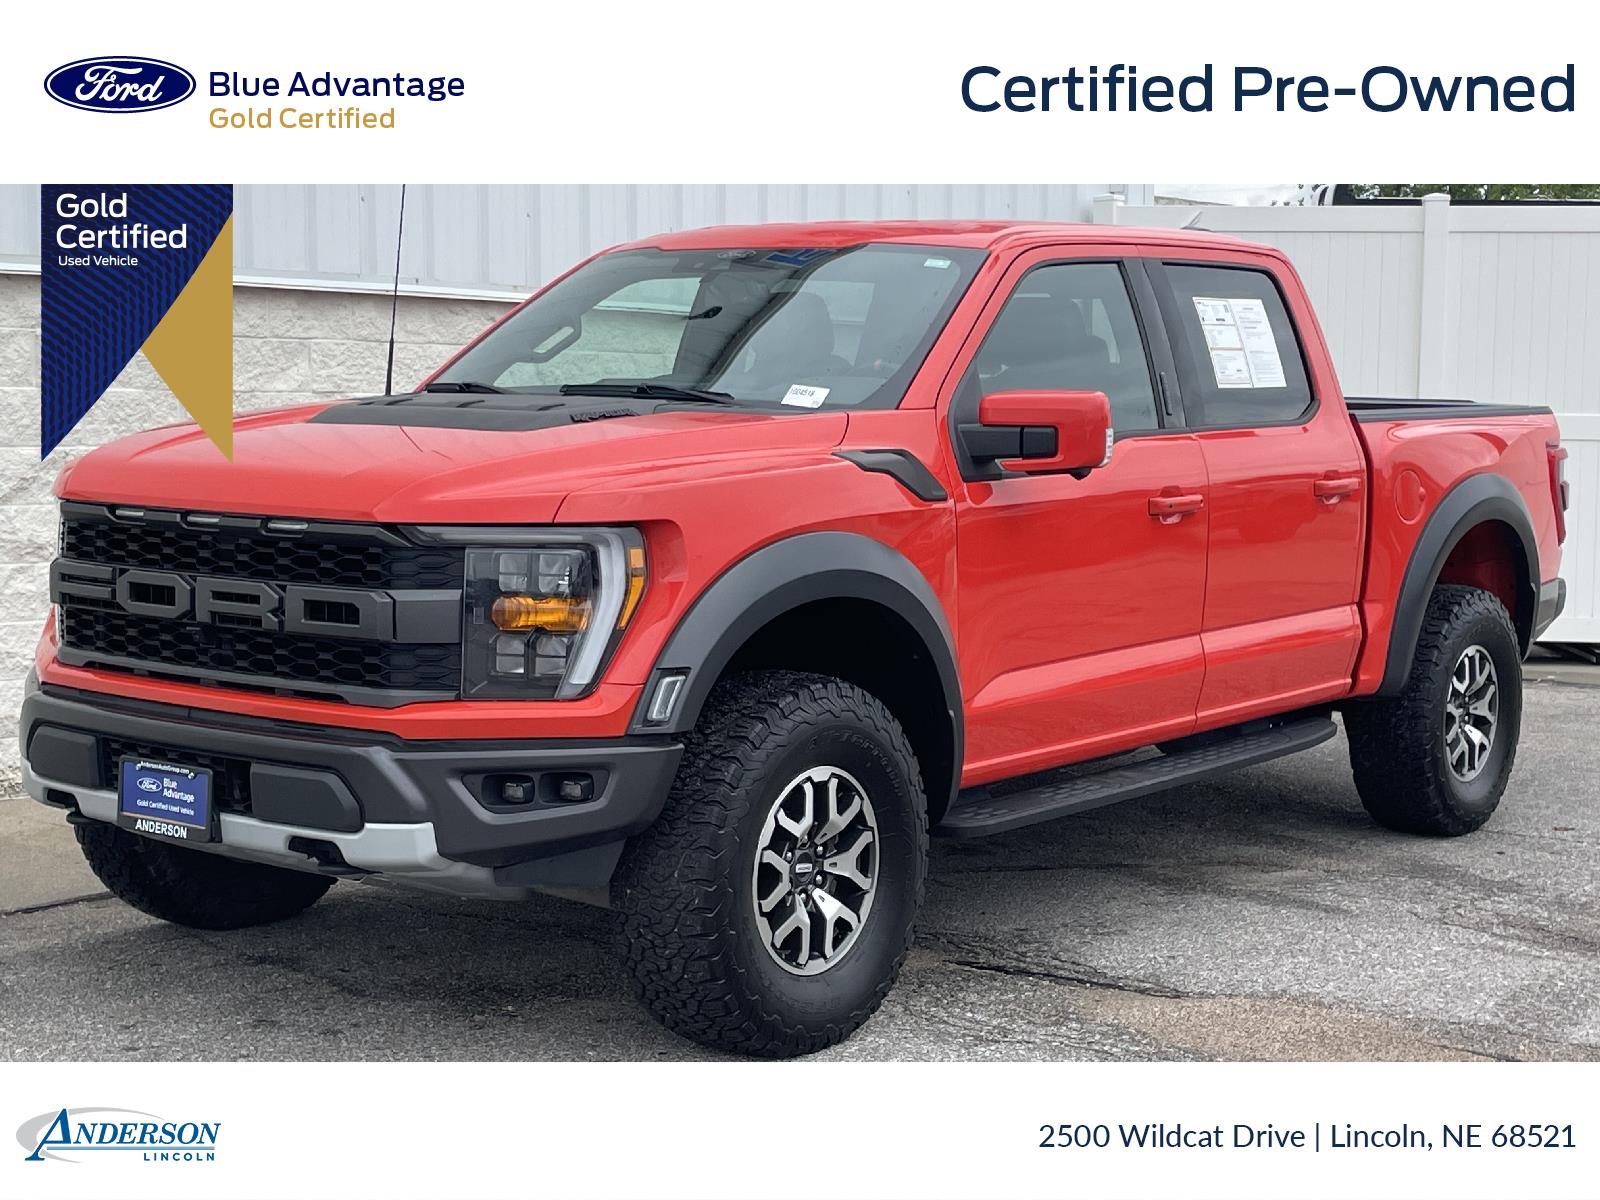 Used 2021 Ford F-150 Raptor Stock: 1004518